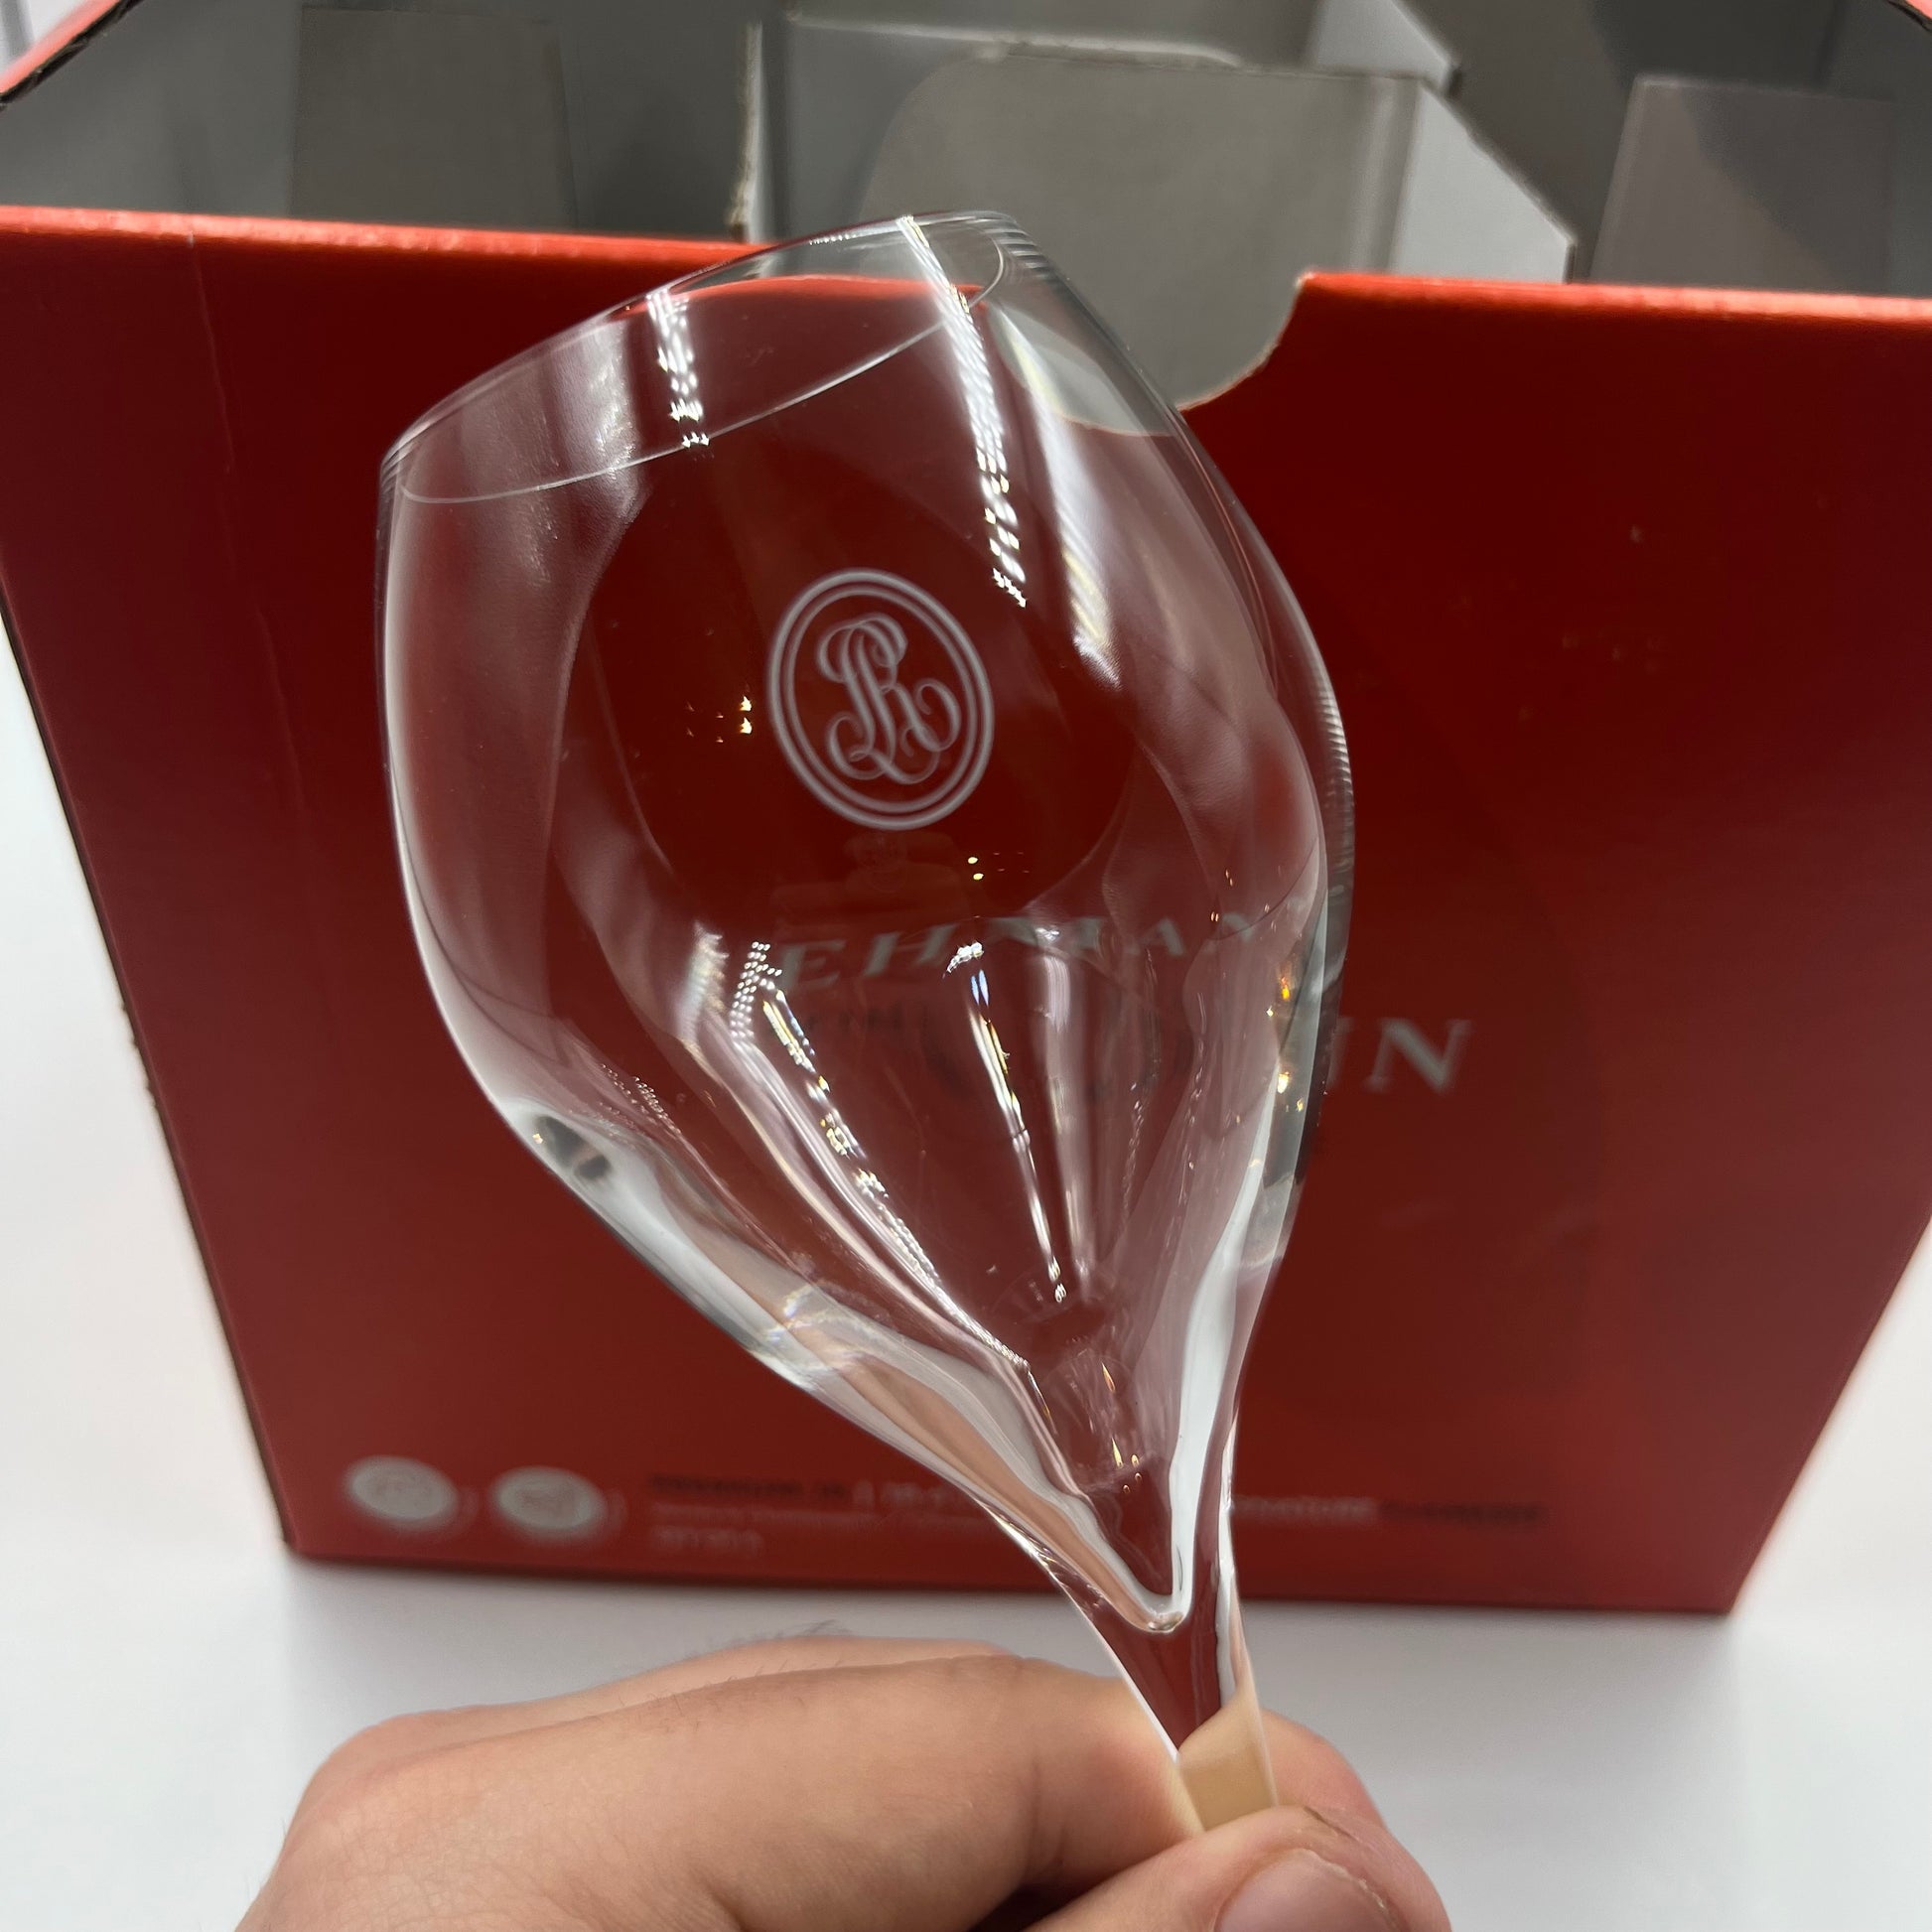 Louis Roederer Champagne Glasses